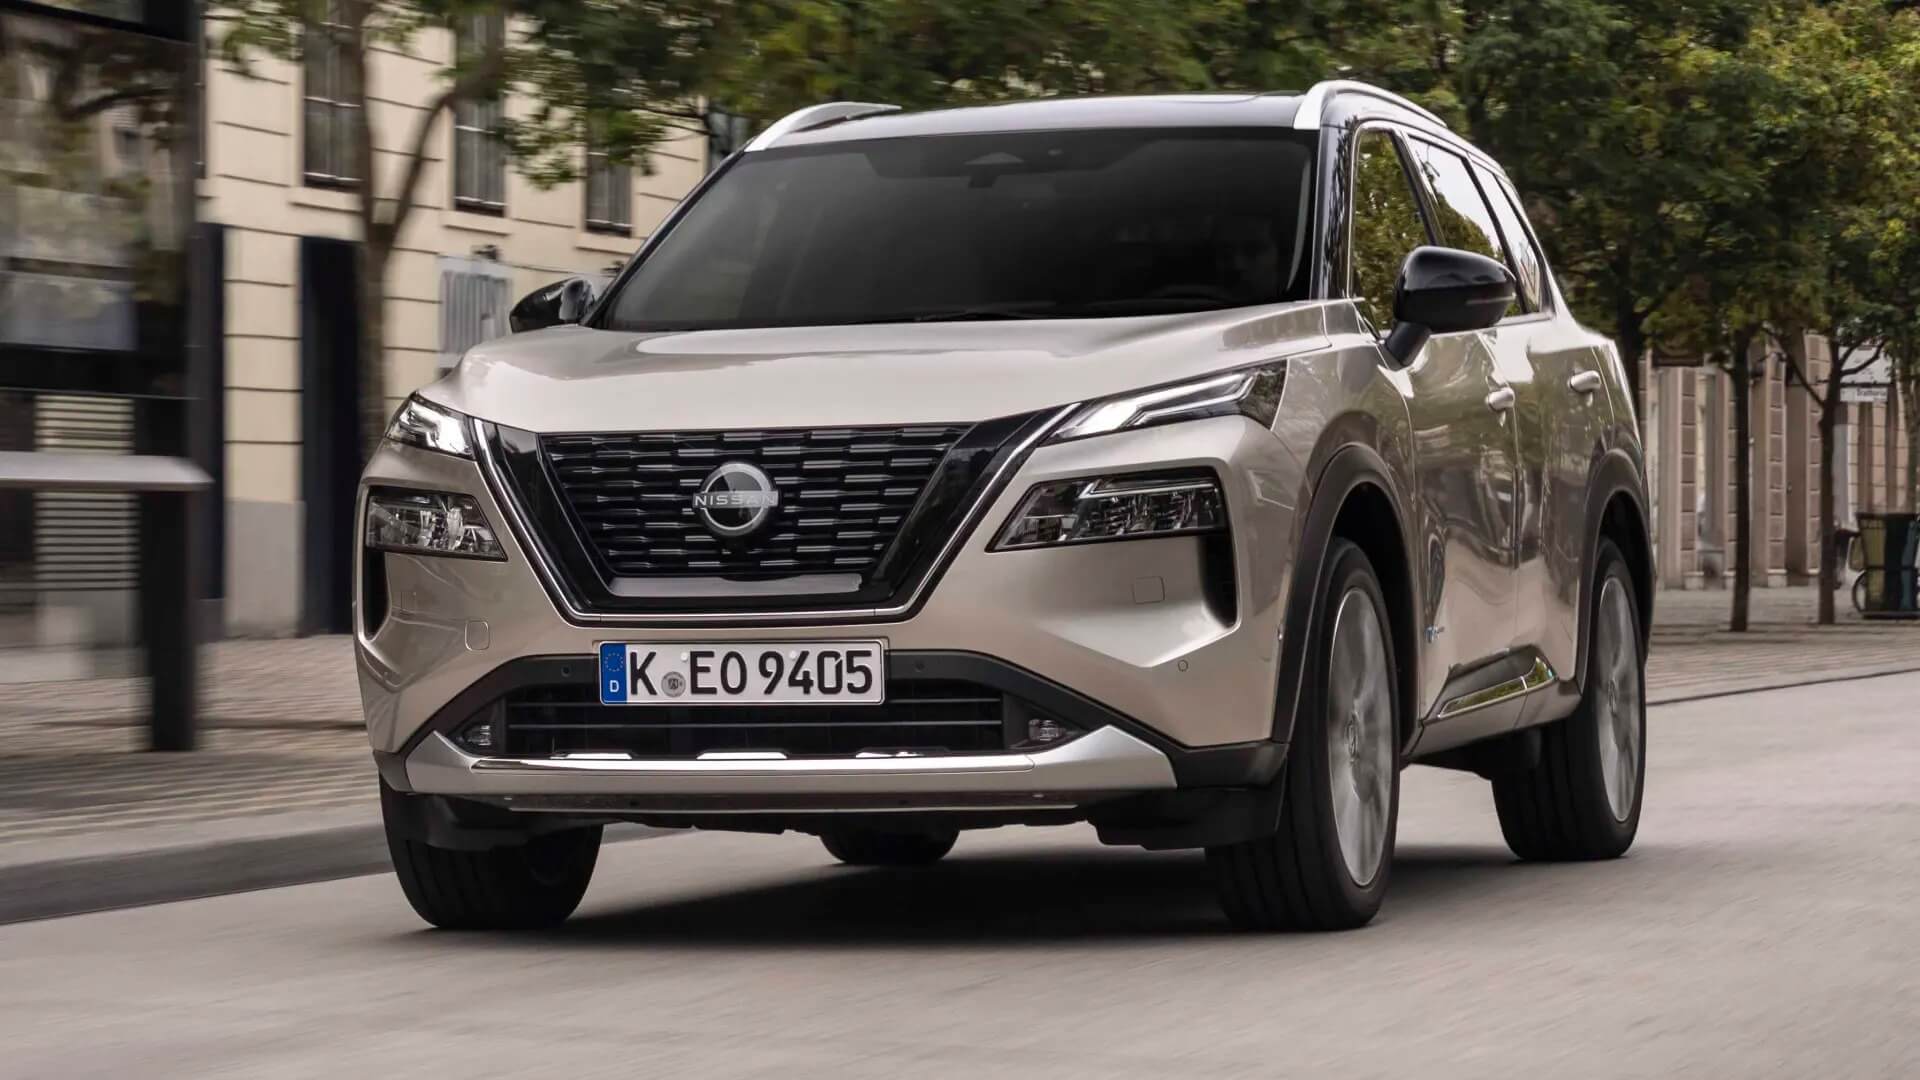 Front Styling in Nissan X-Trail ePower